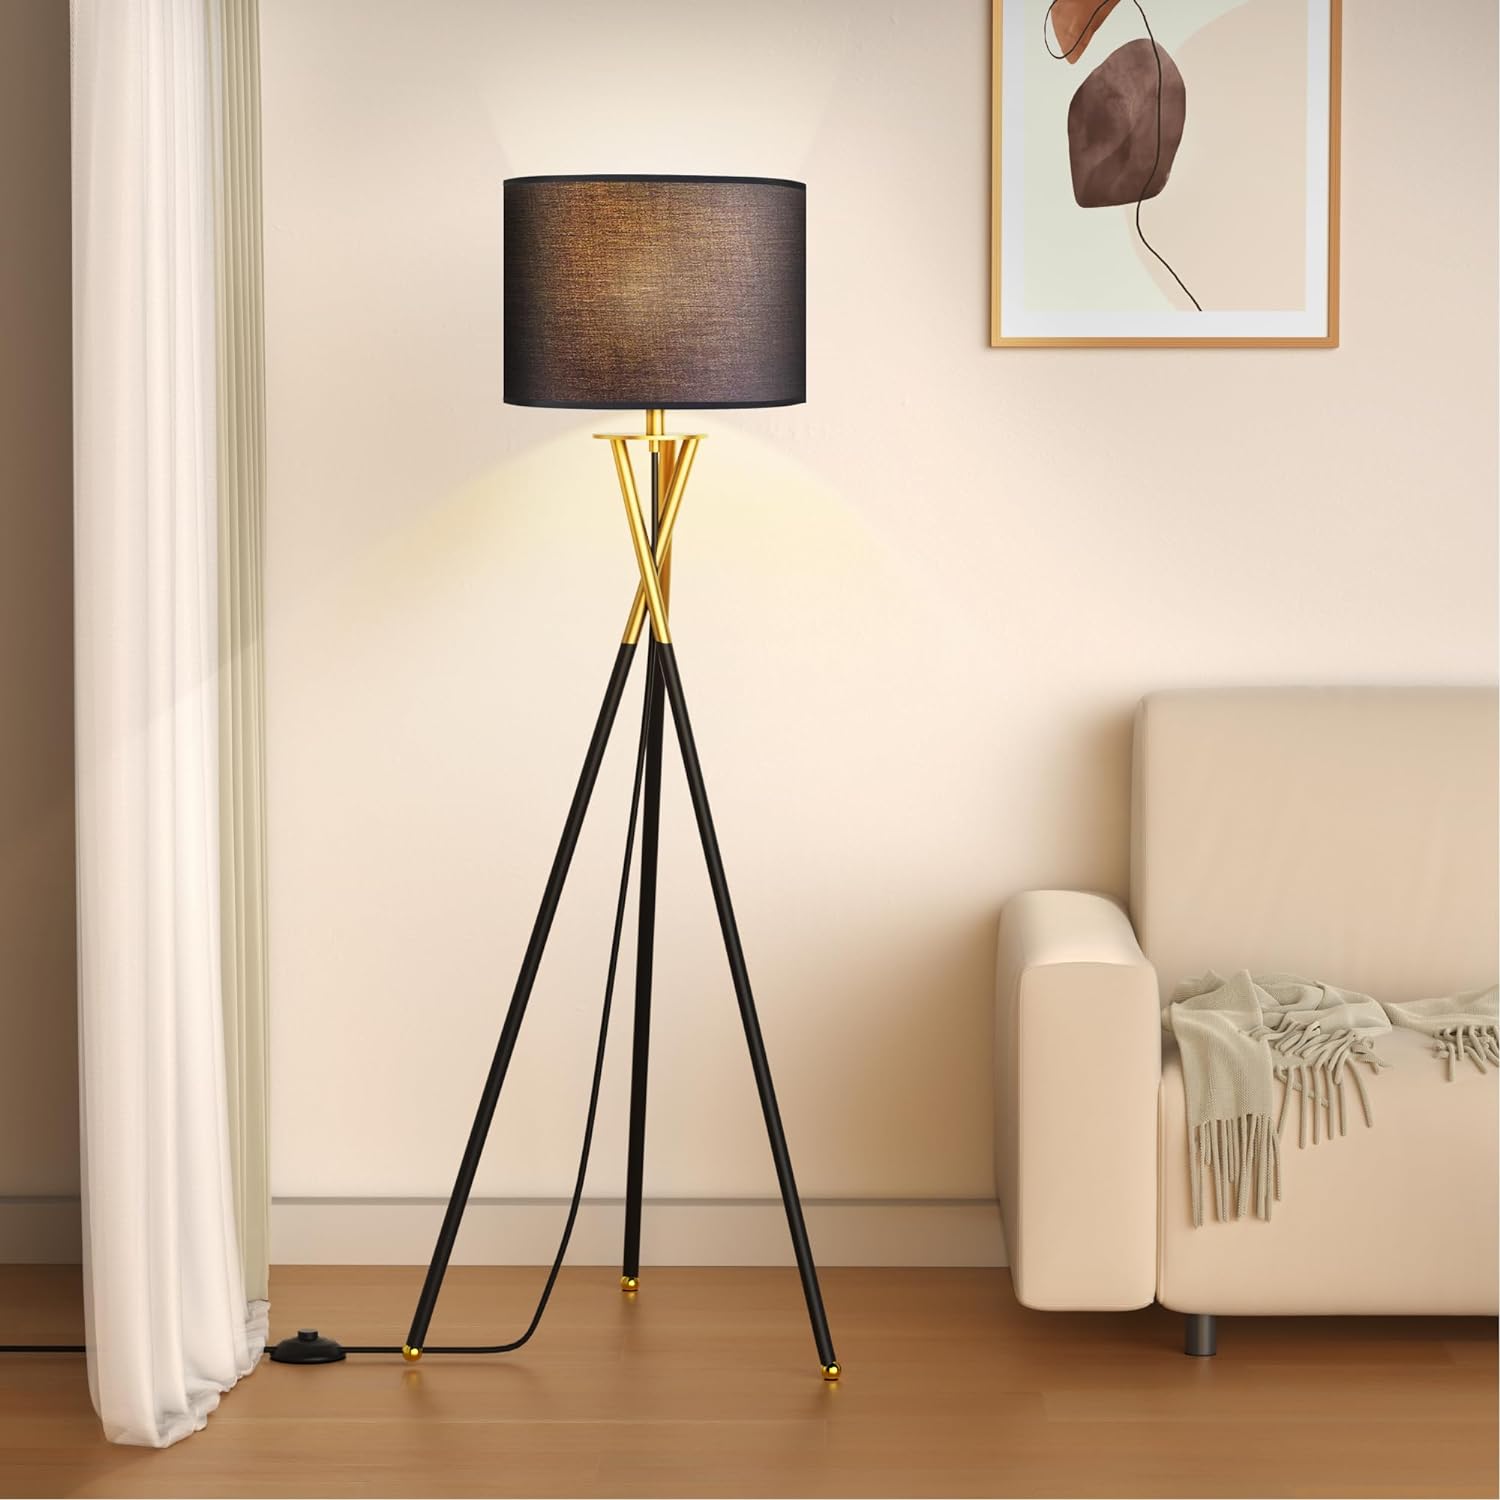 Capon Tripod Floor Lamp for Living Room, Tall Standing Lamp White with E26 Bulbs, Beige/Black Linen Shade and 3 Color Temperatures, Ideal for Bedroom, Office, Classroom, Dorm Room and Study Room